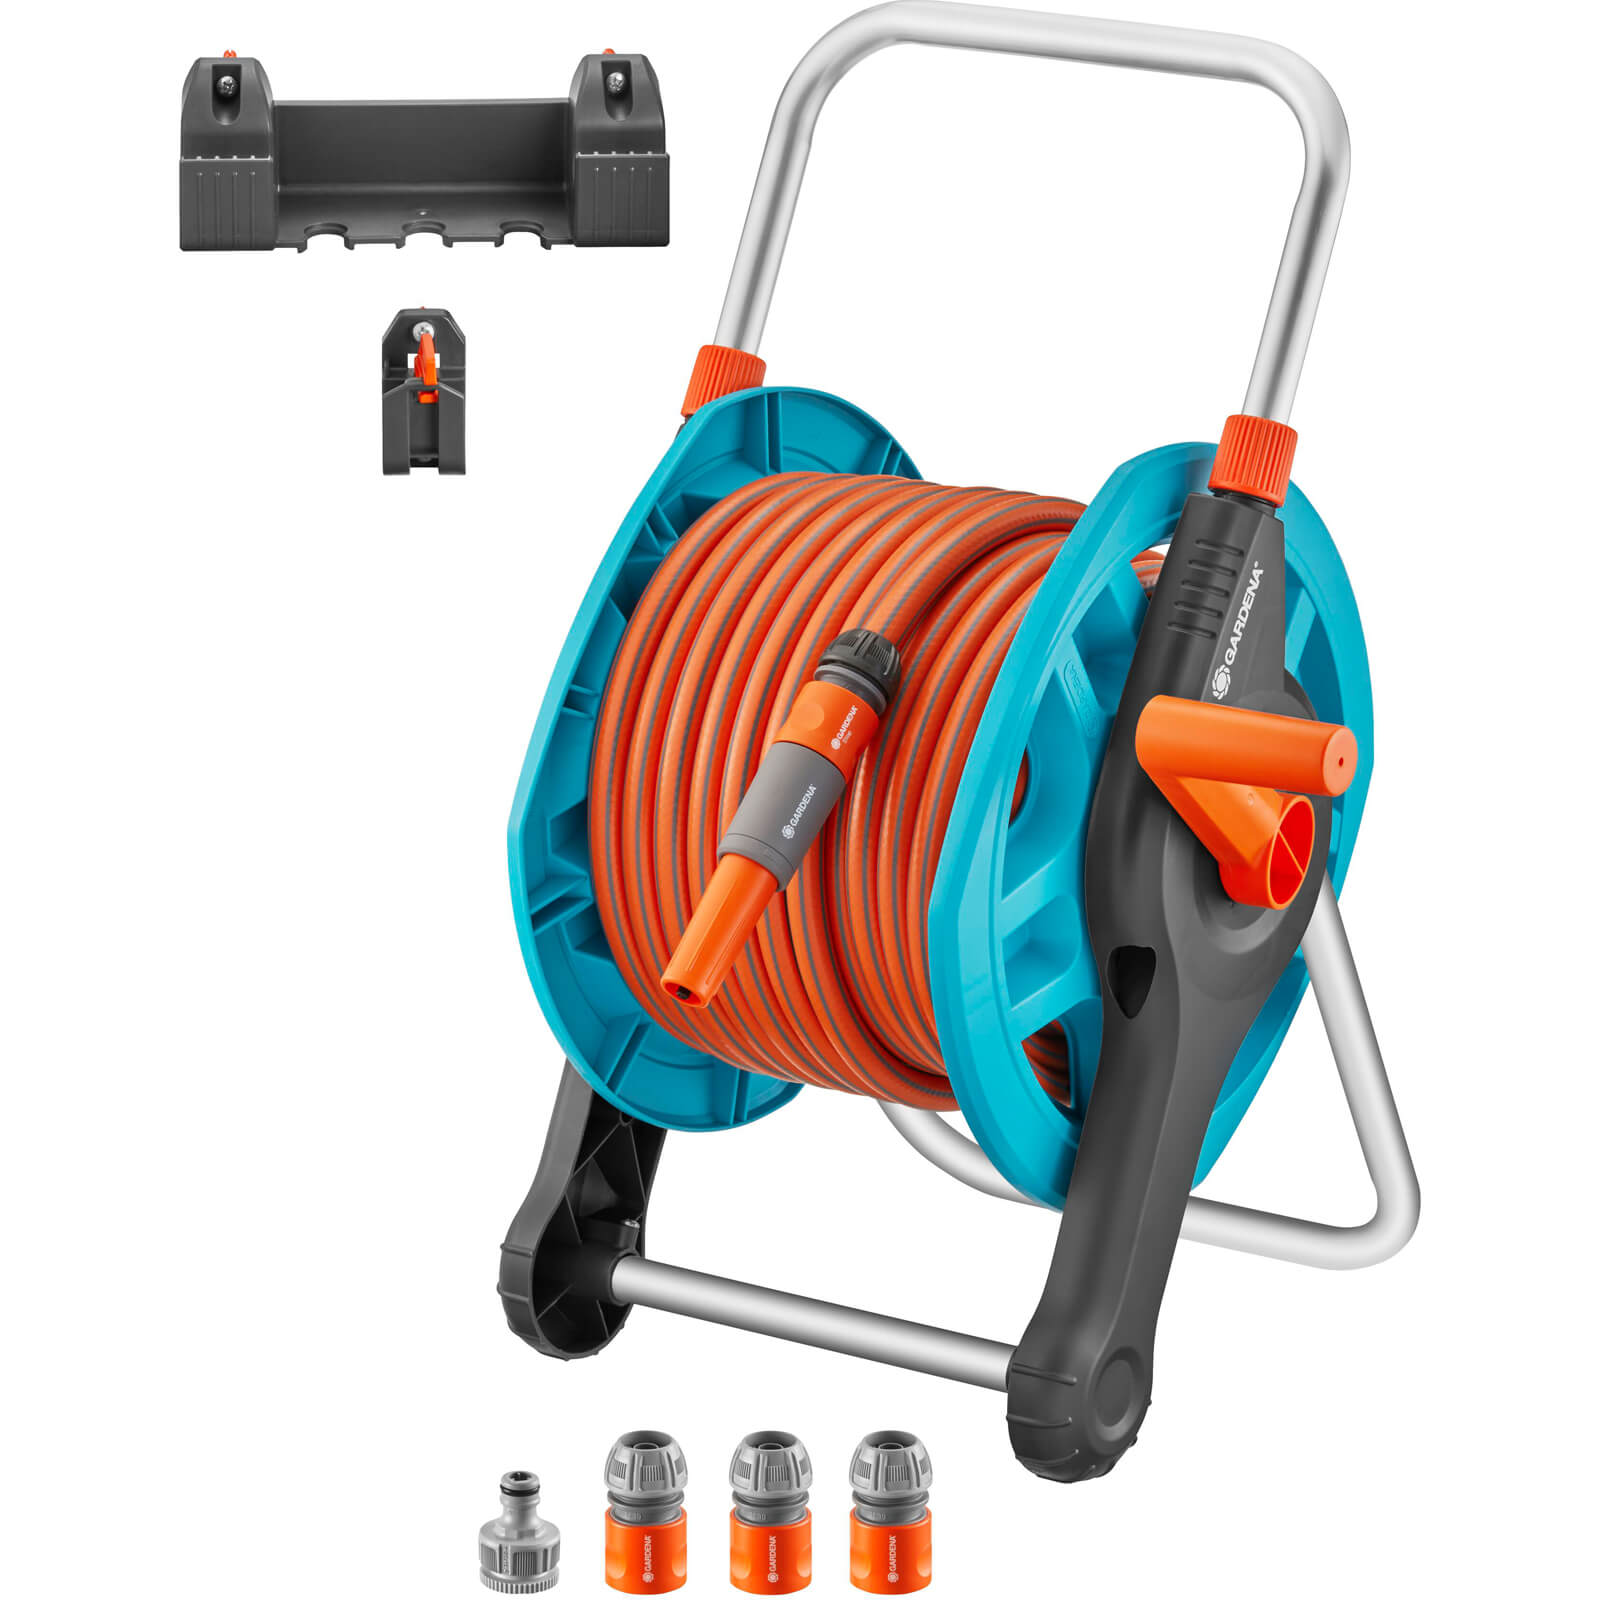 Image of Gardena Basic Floor and Wall Hose Reel 1/2" / 12.5mm 25m